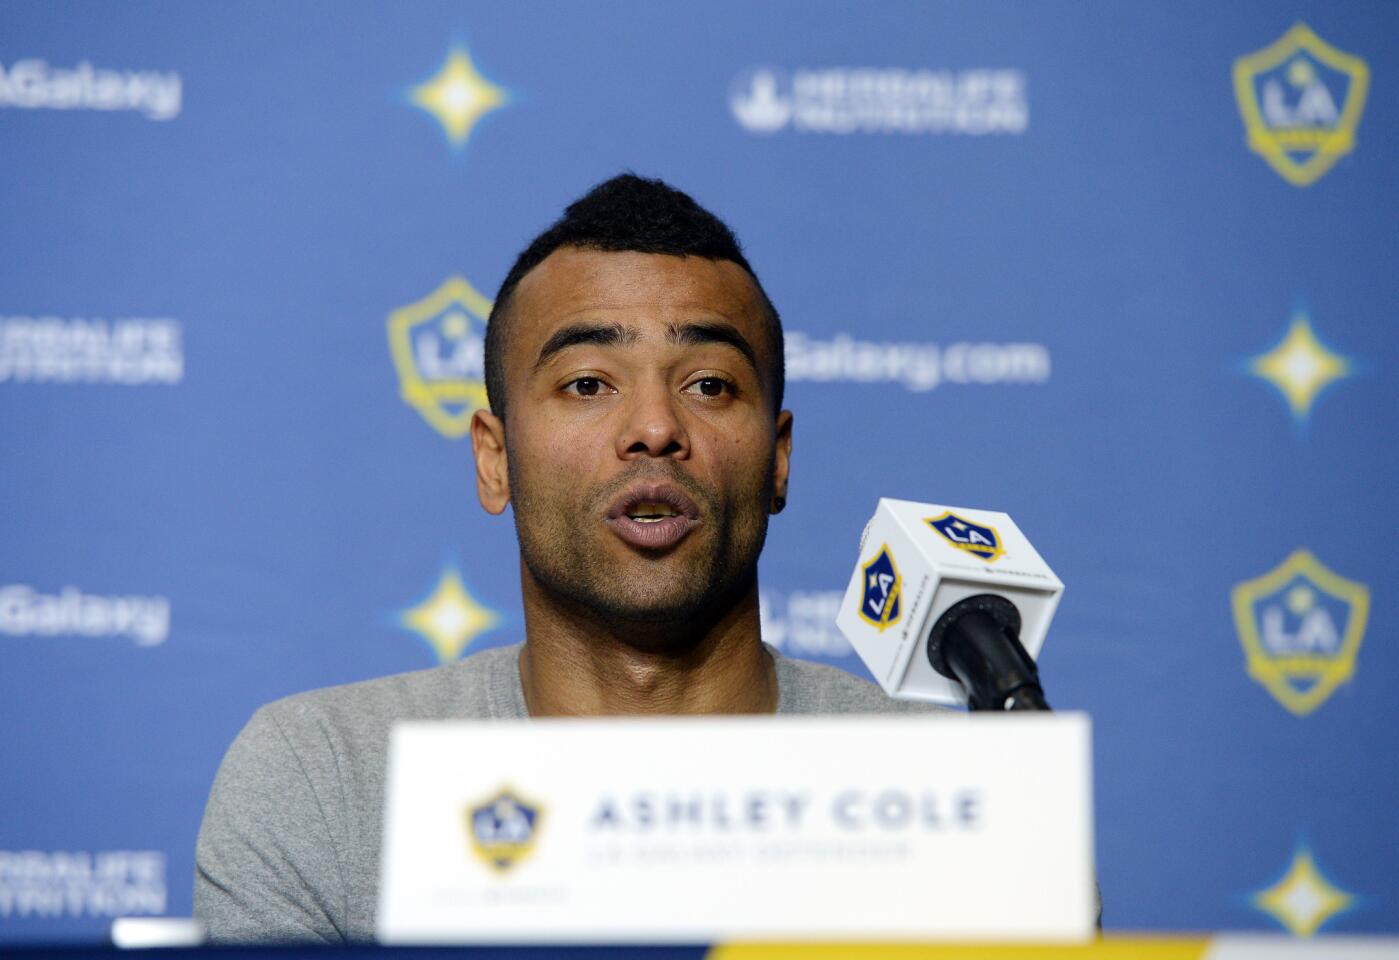 CARSON, CA - FEBRUARY 5: Ashley Cole #3 of the Los Angeles Galaxy speaks after he was introduced during a news conference at StubHub Center February 5, 2016, in Carson, California. (Photo by Kevork Djansezian/Getty Images) ** OUTS - ELSENT, FPG, CM - OUTS * NM, PH, VA if sourced by CT, LA or MoD **